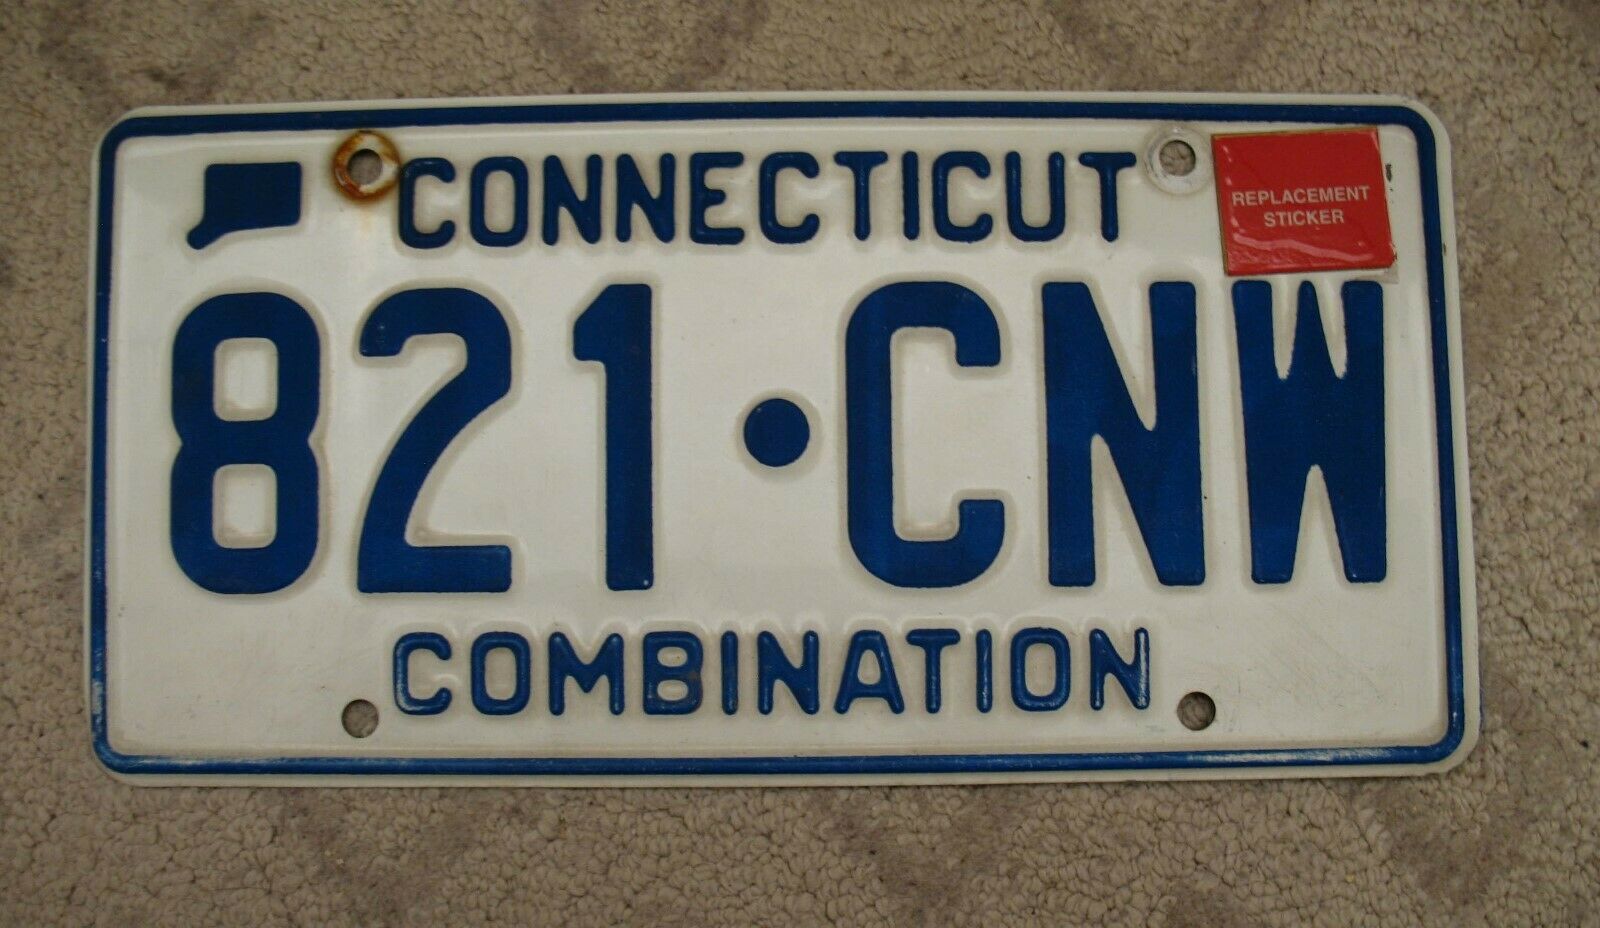 B3 - Connecticut Combination License Plate W/ Replacement Sticker 821-cnw